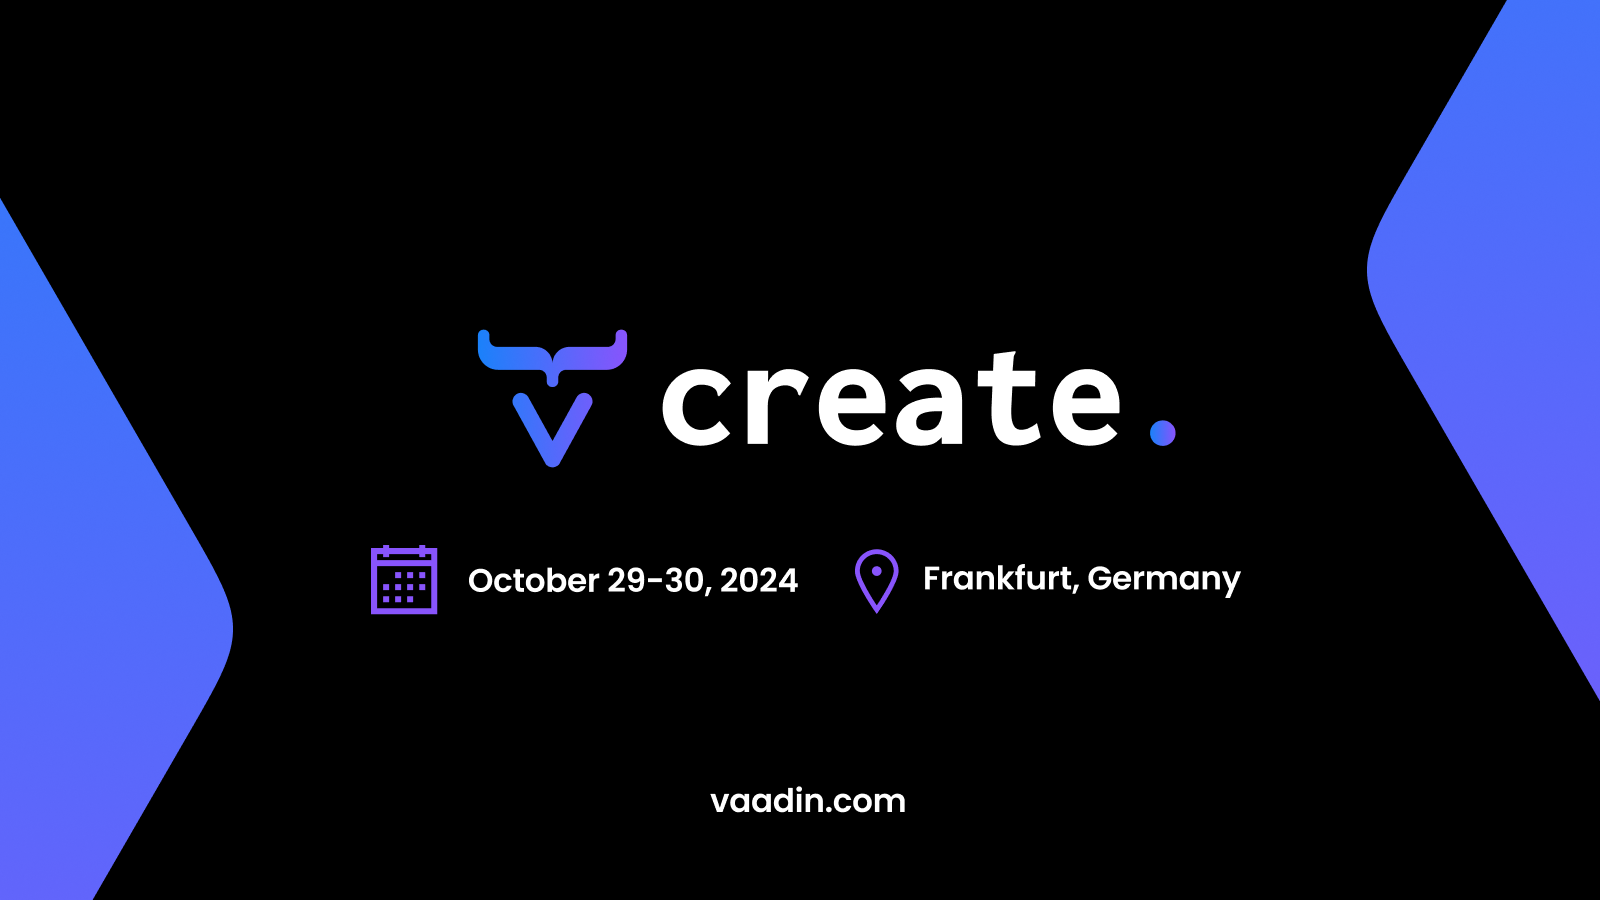 Join us at Vaadin Create conference—the tech conference for developers using the Vaadin platform!